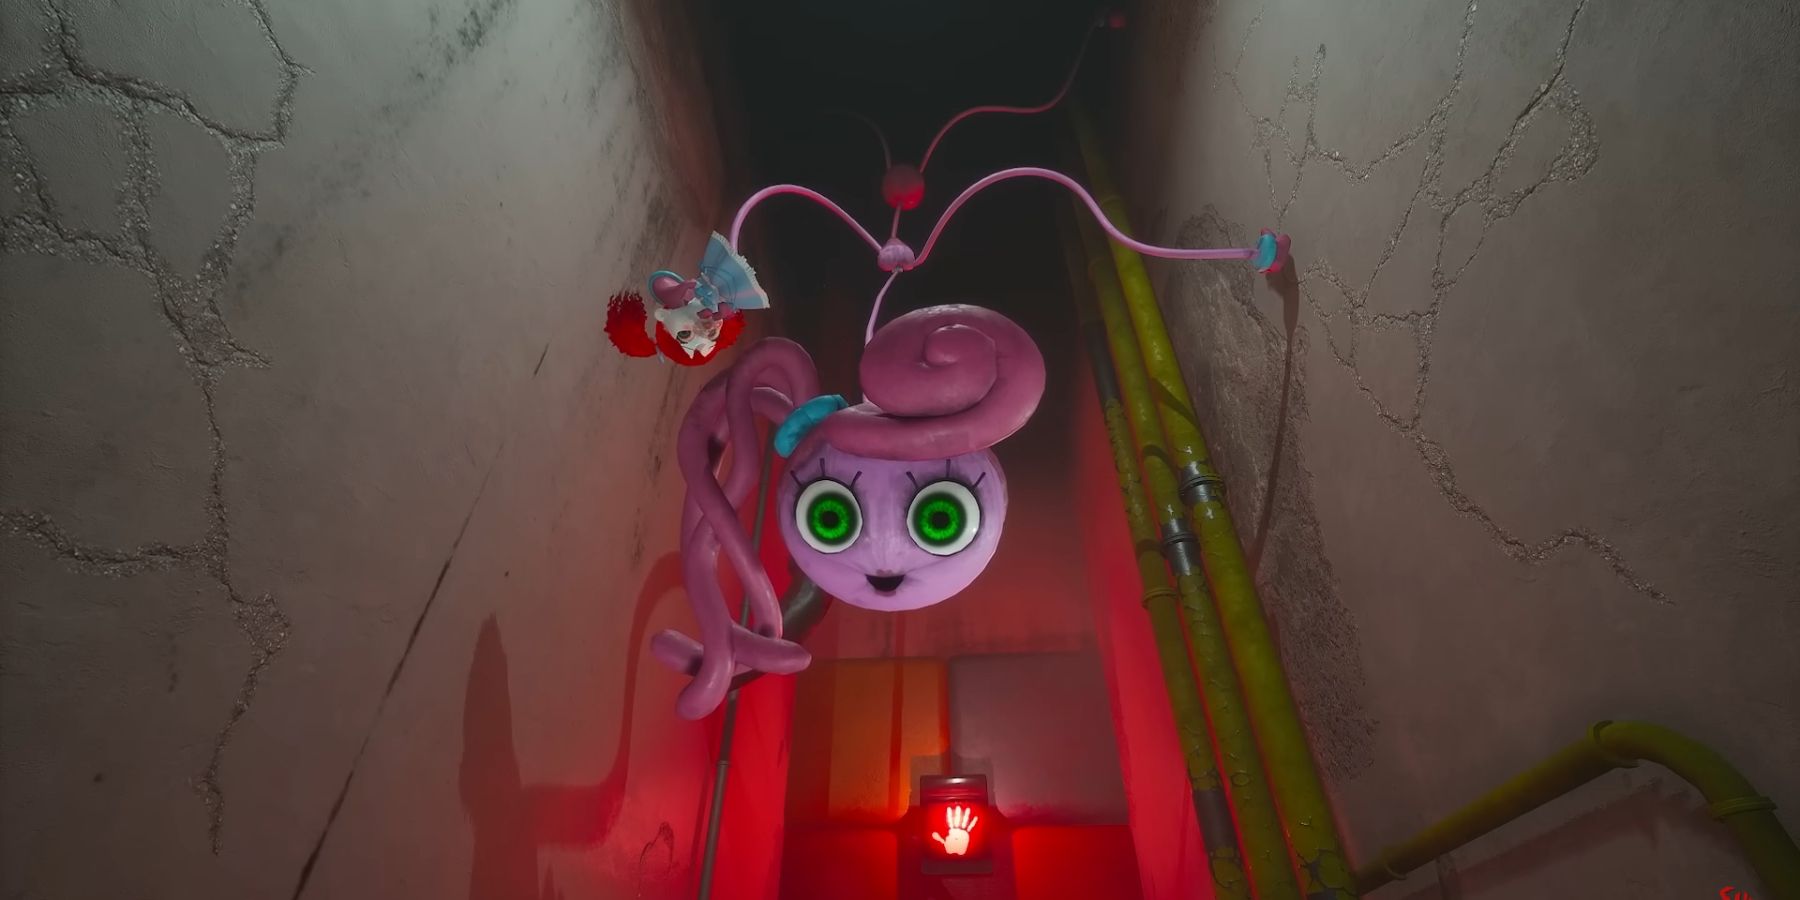 Poppy Playtime Review: One of The Best Indie Horror Games This